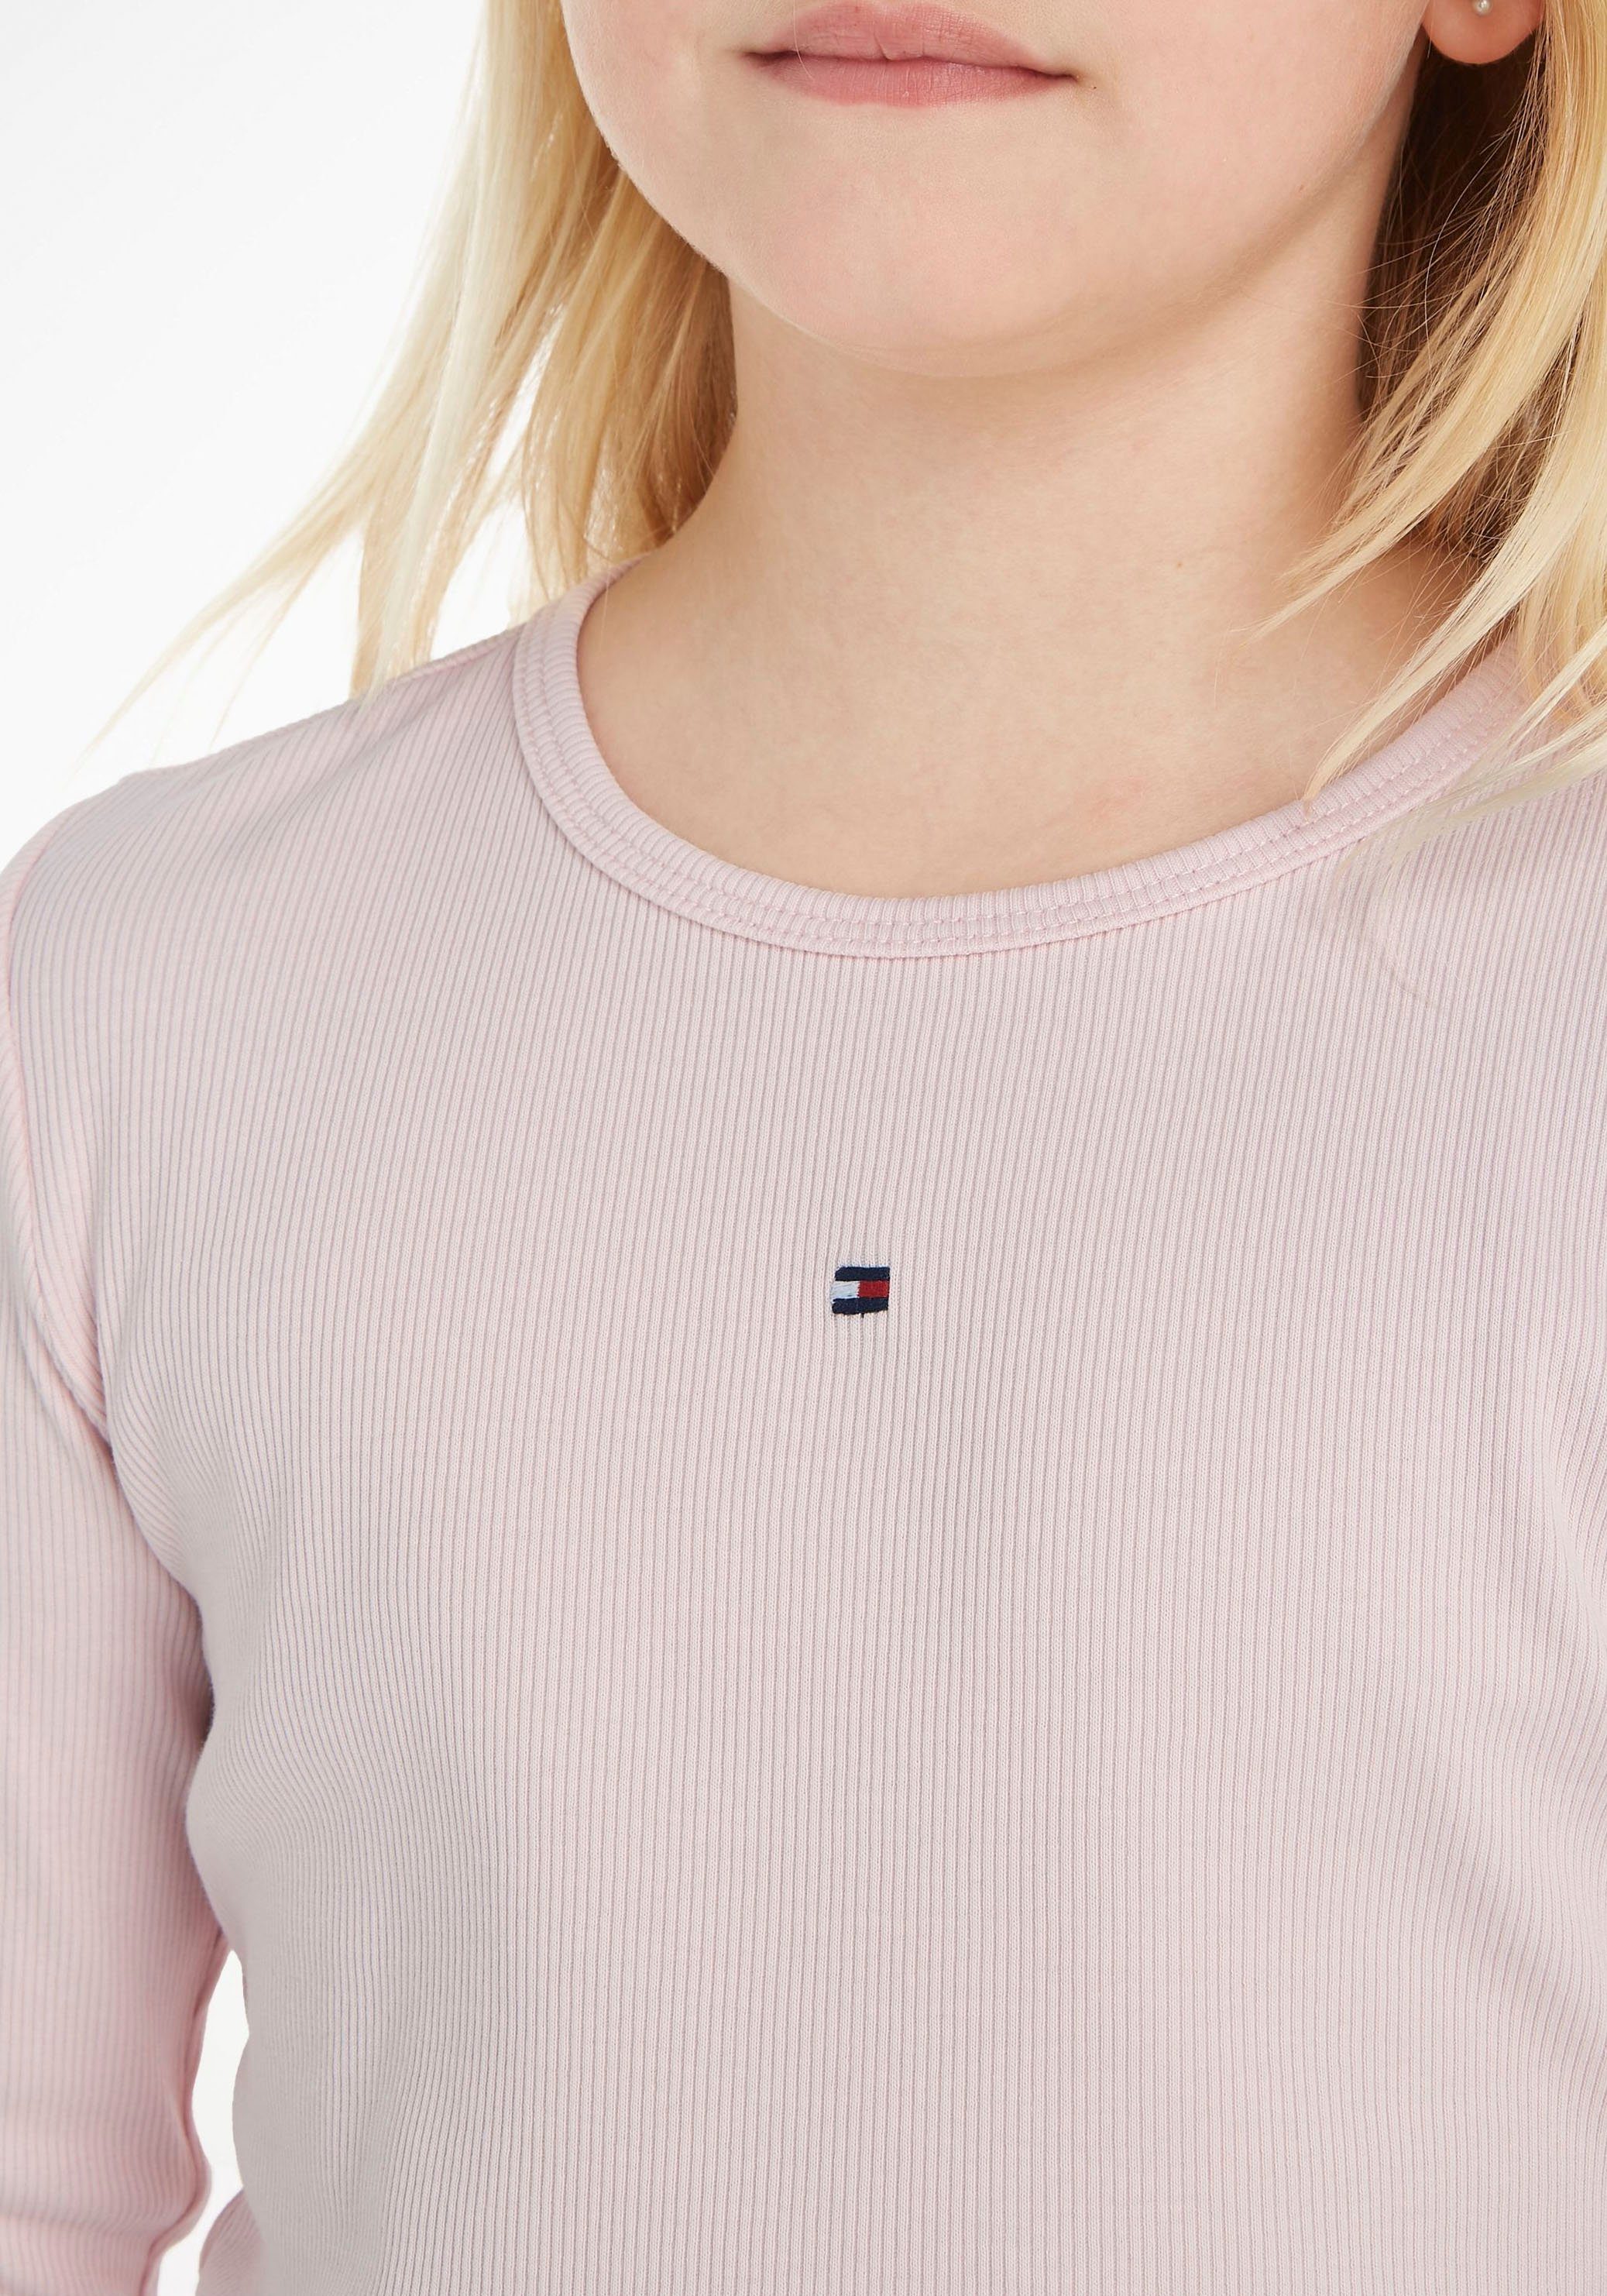 Tommy TOP Rippenstruktur RIB leichter L/S ESSENTIAL in Langarmshirt Hilfiger Whimsy_Pink